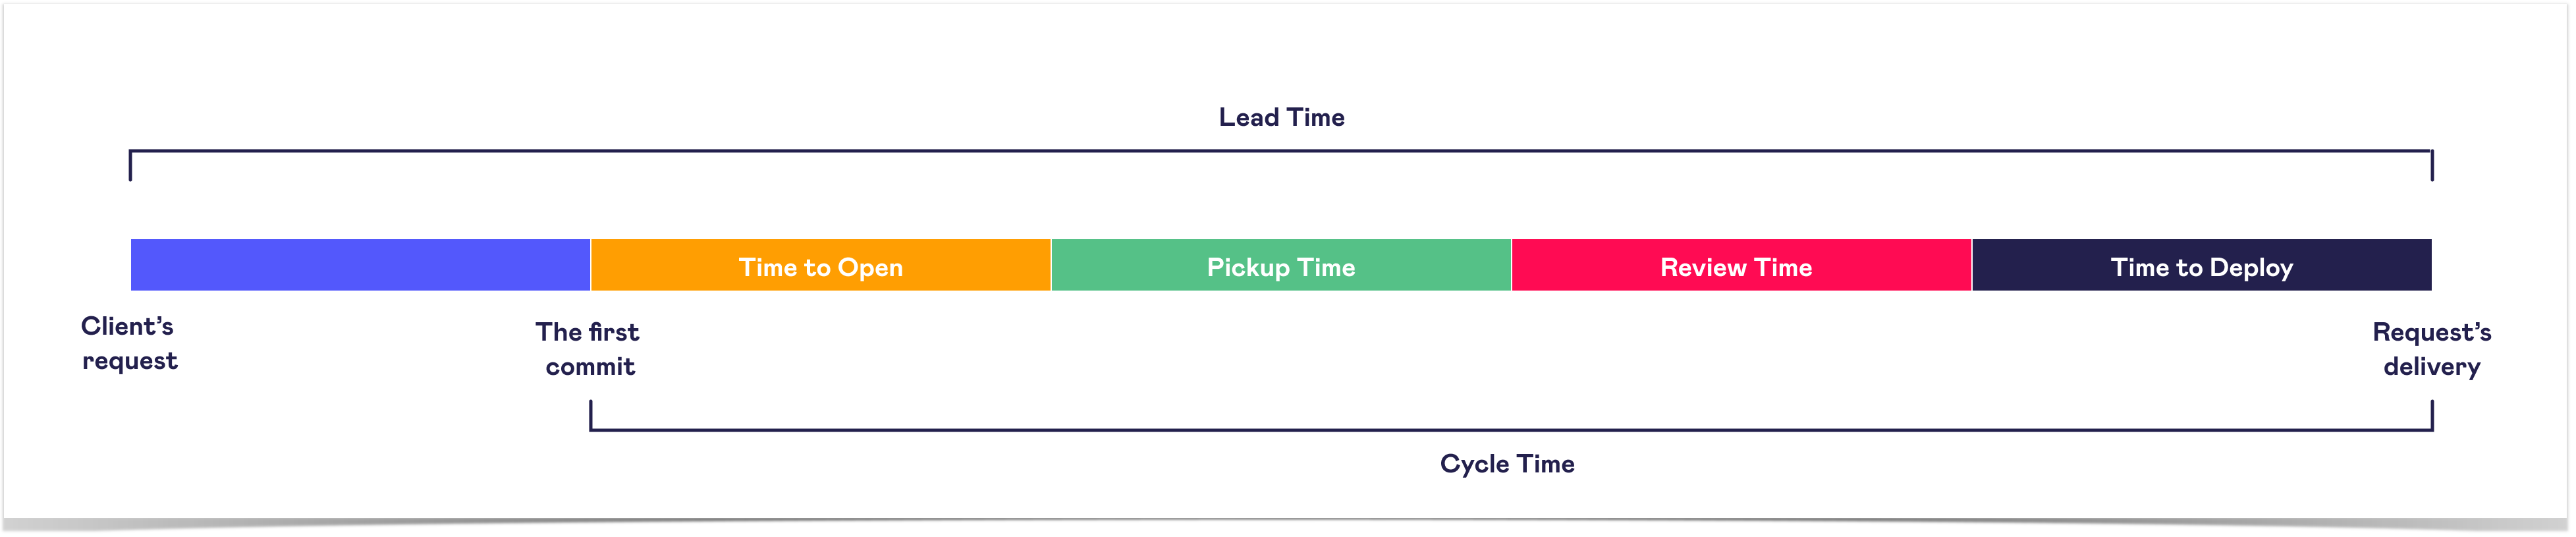 cycle time vs lead time